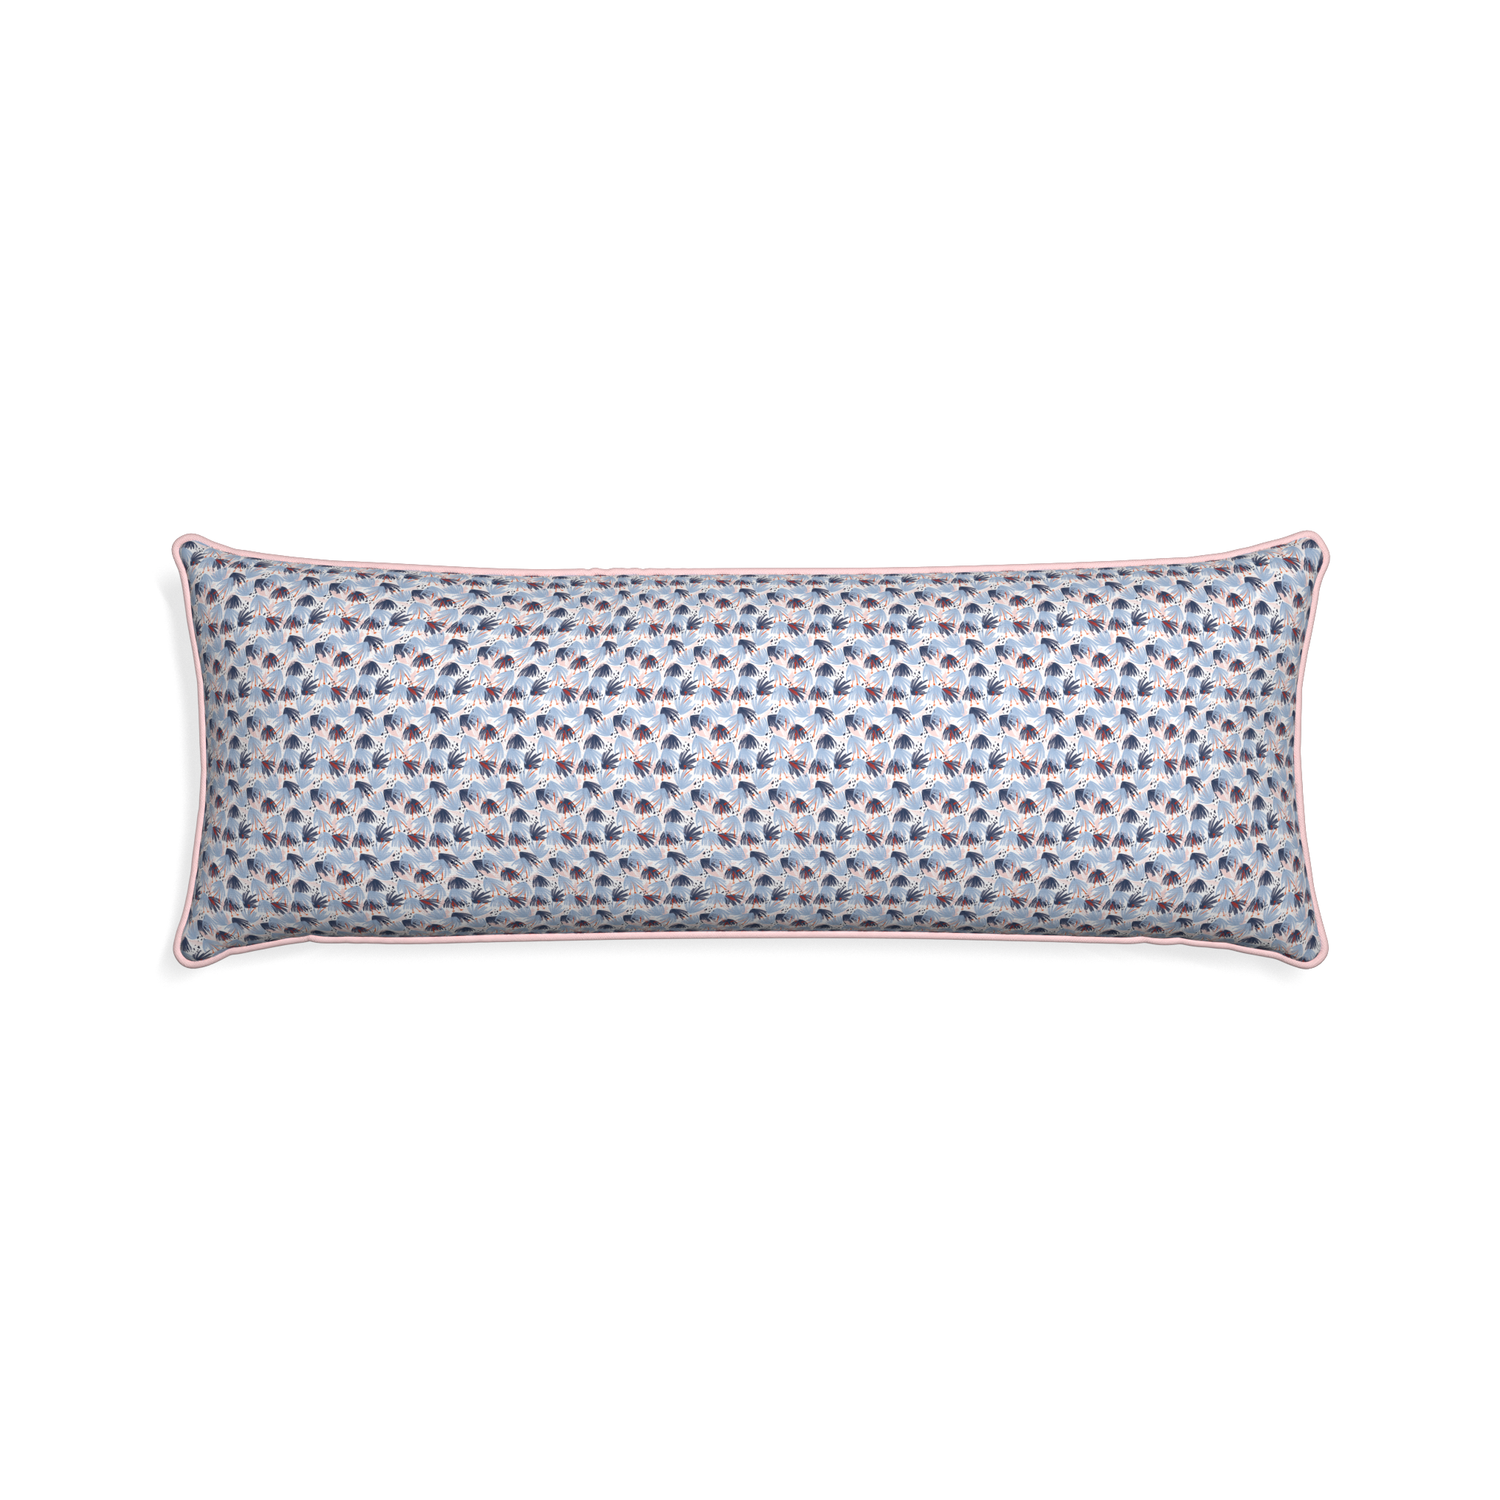 Xl-lumbar eden blue custom pillow with petal piping on white background